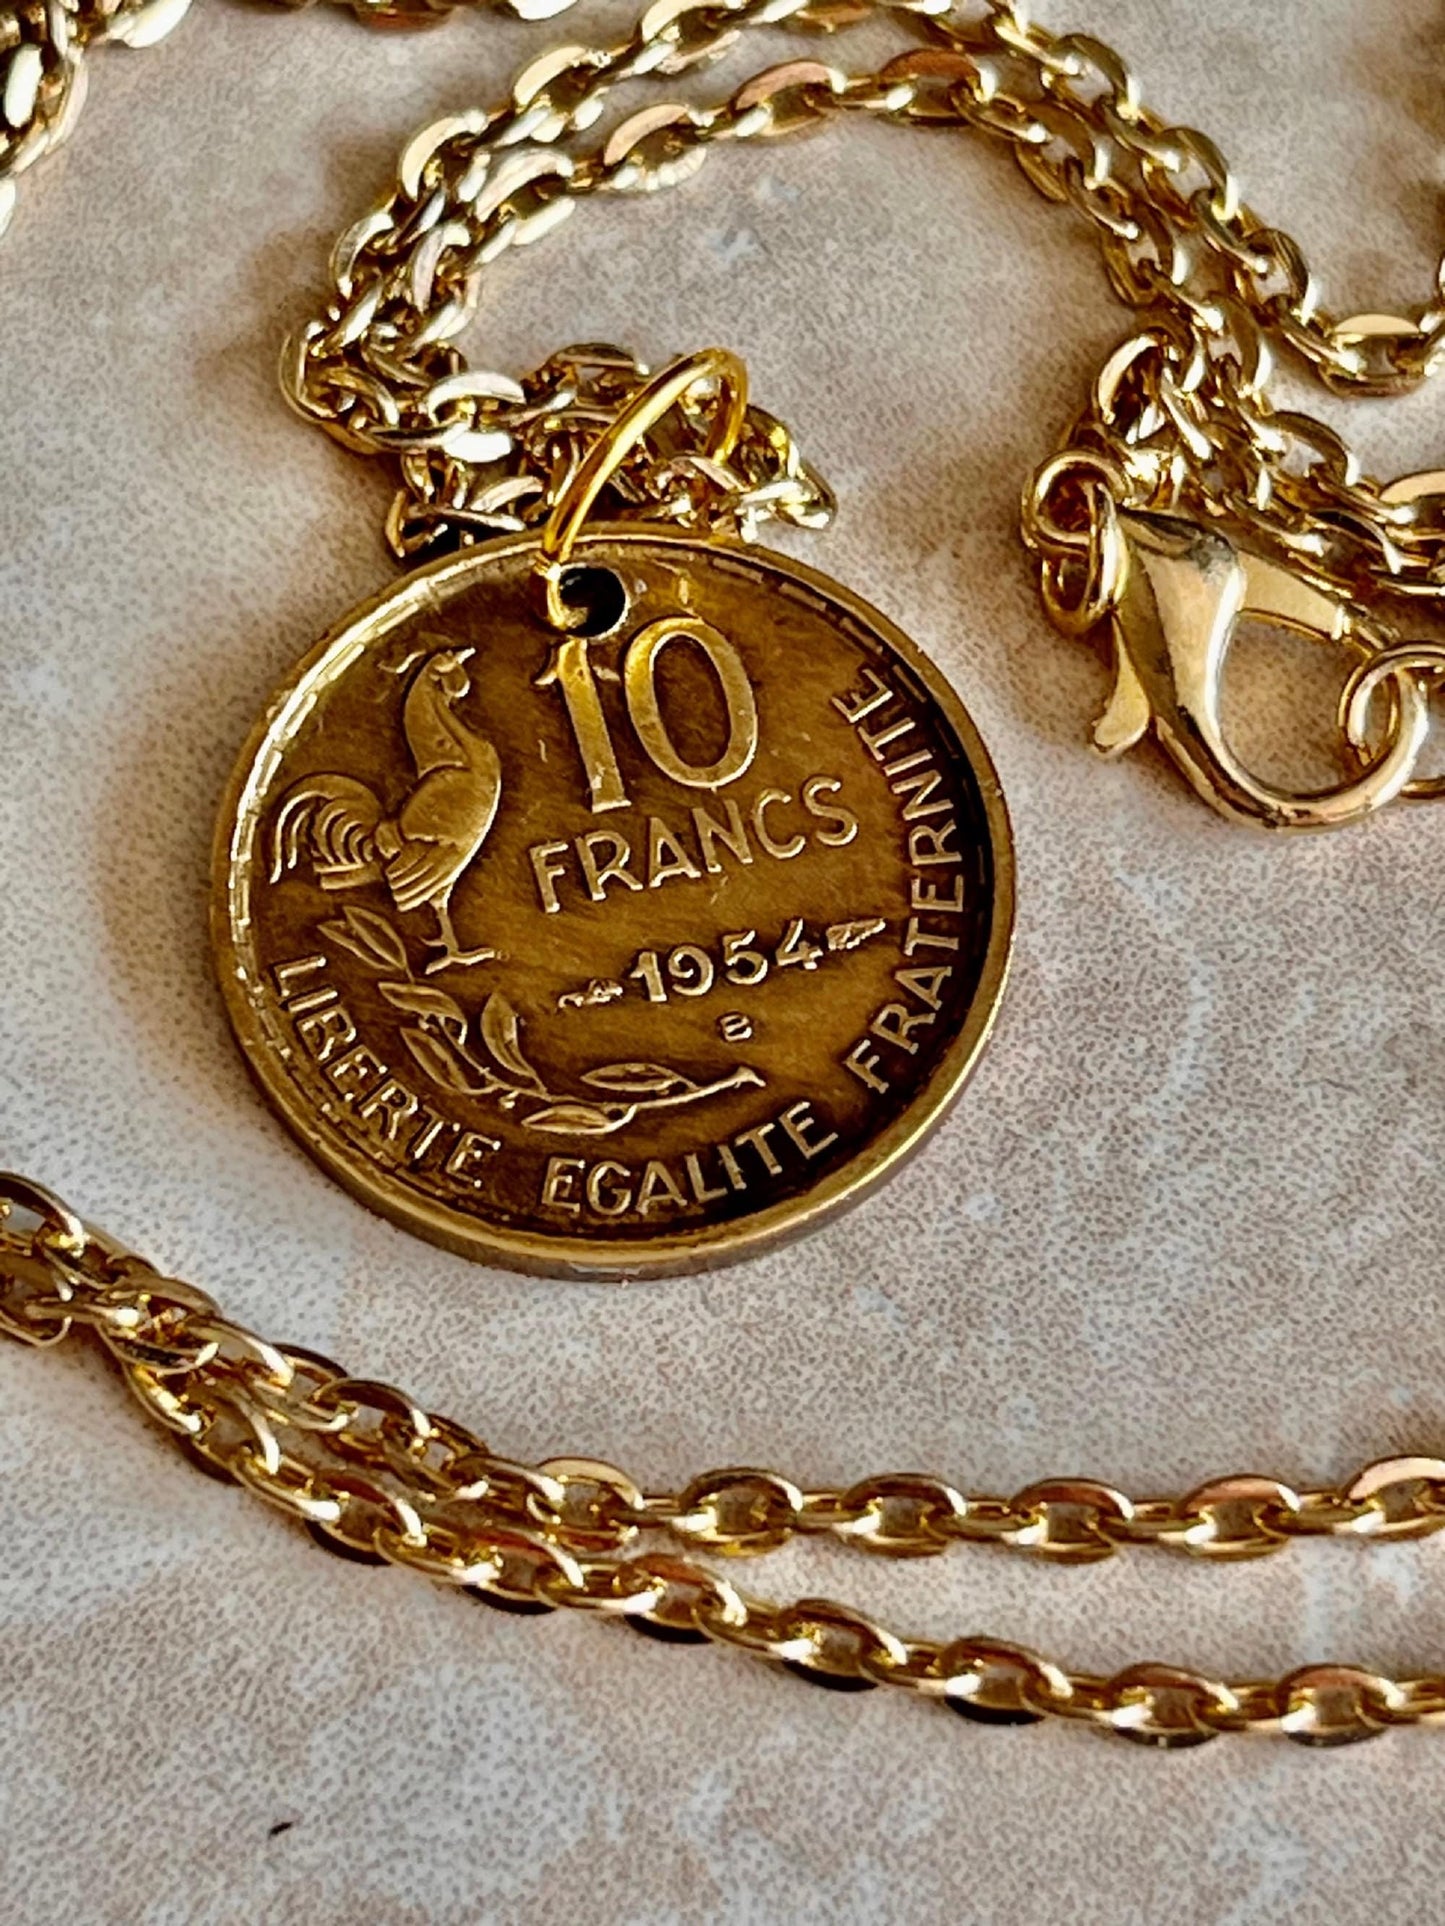 France Coin Pendant French 10 Necklace Handmade Custom Made Charm Gift For Friend Coin Charm Gift For Him, Her, Coin Collector, World Coins